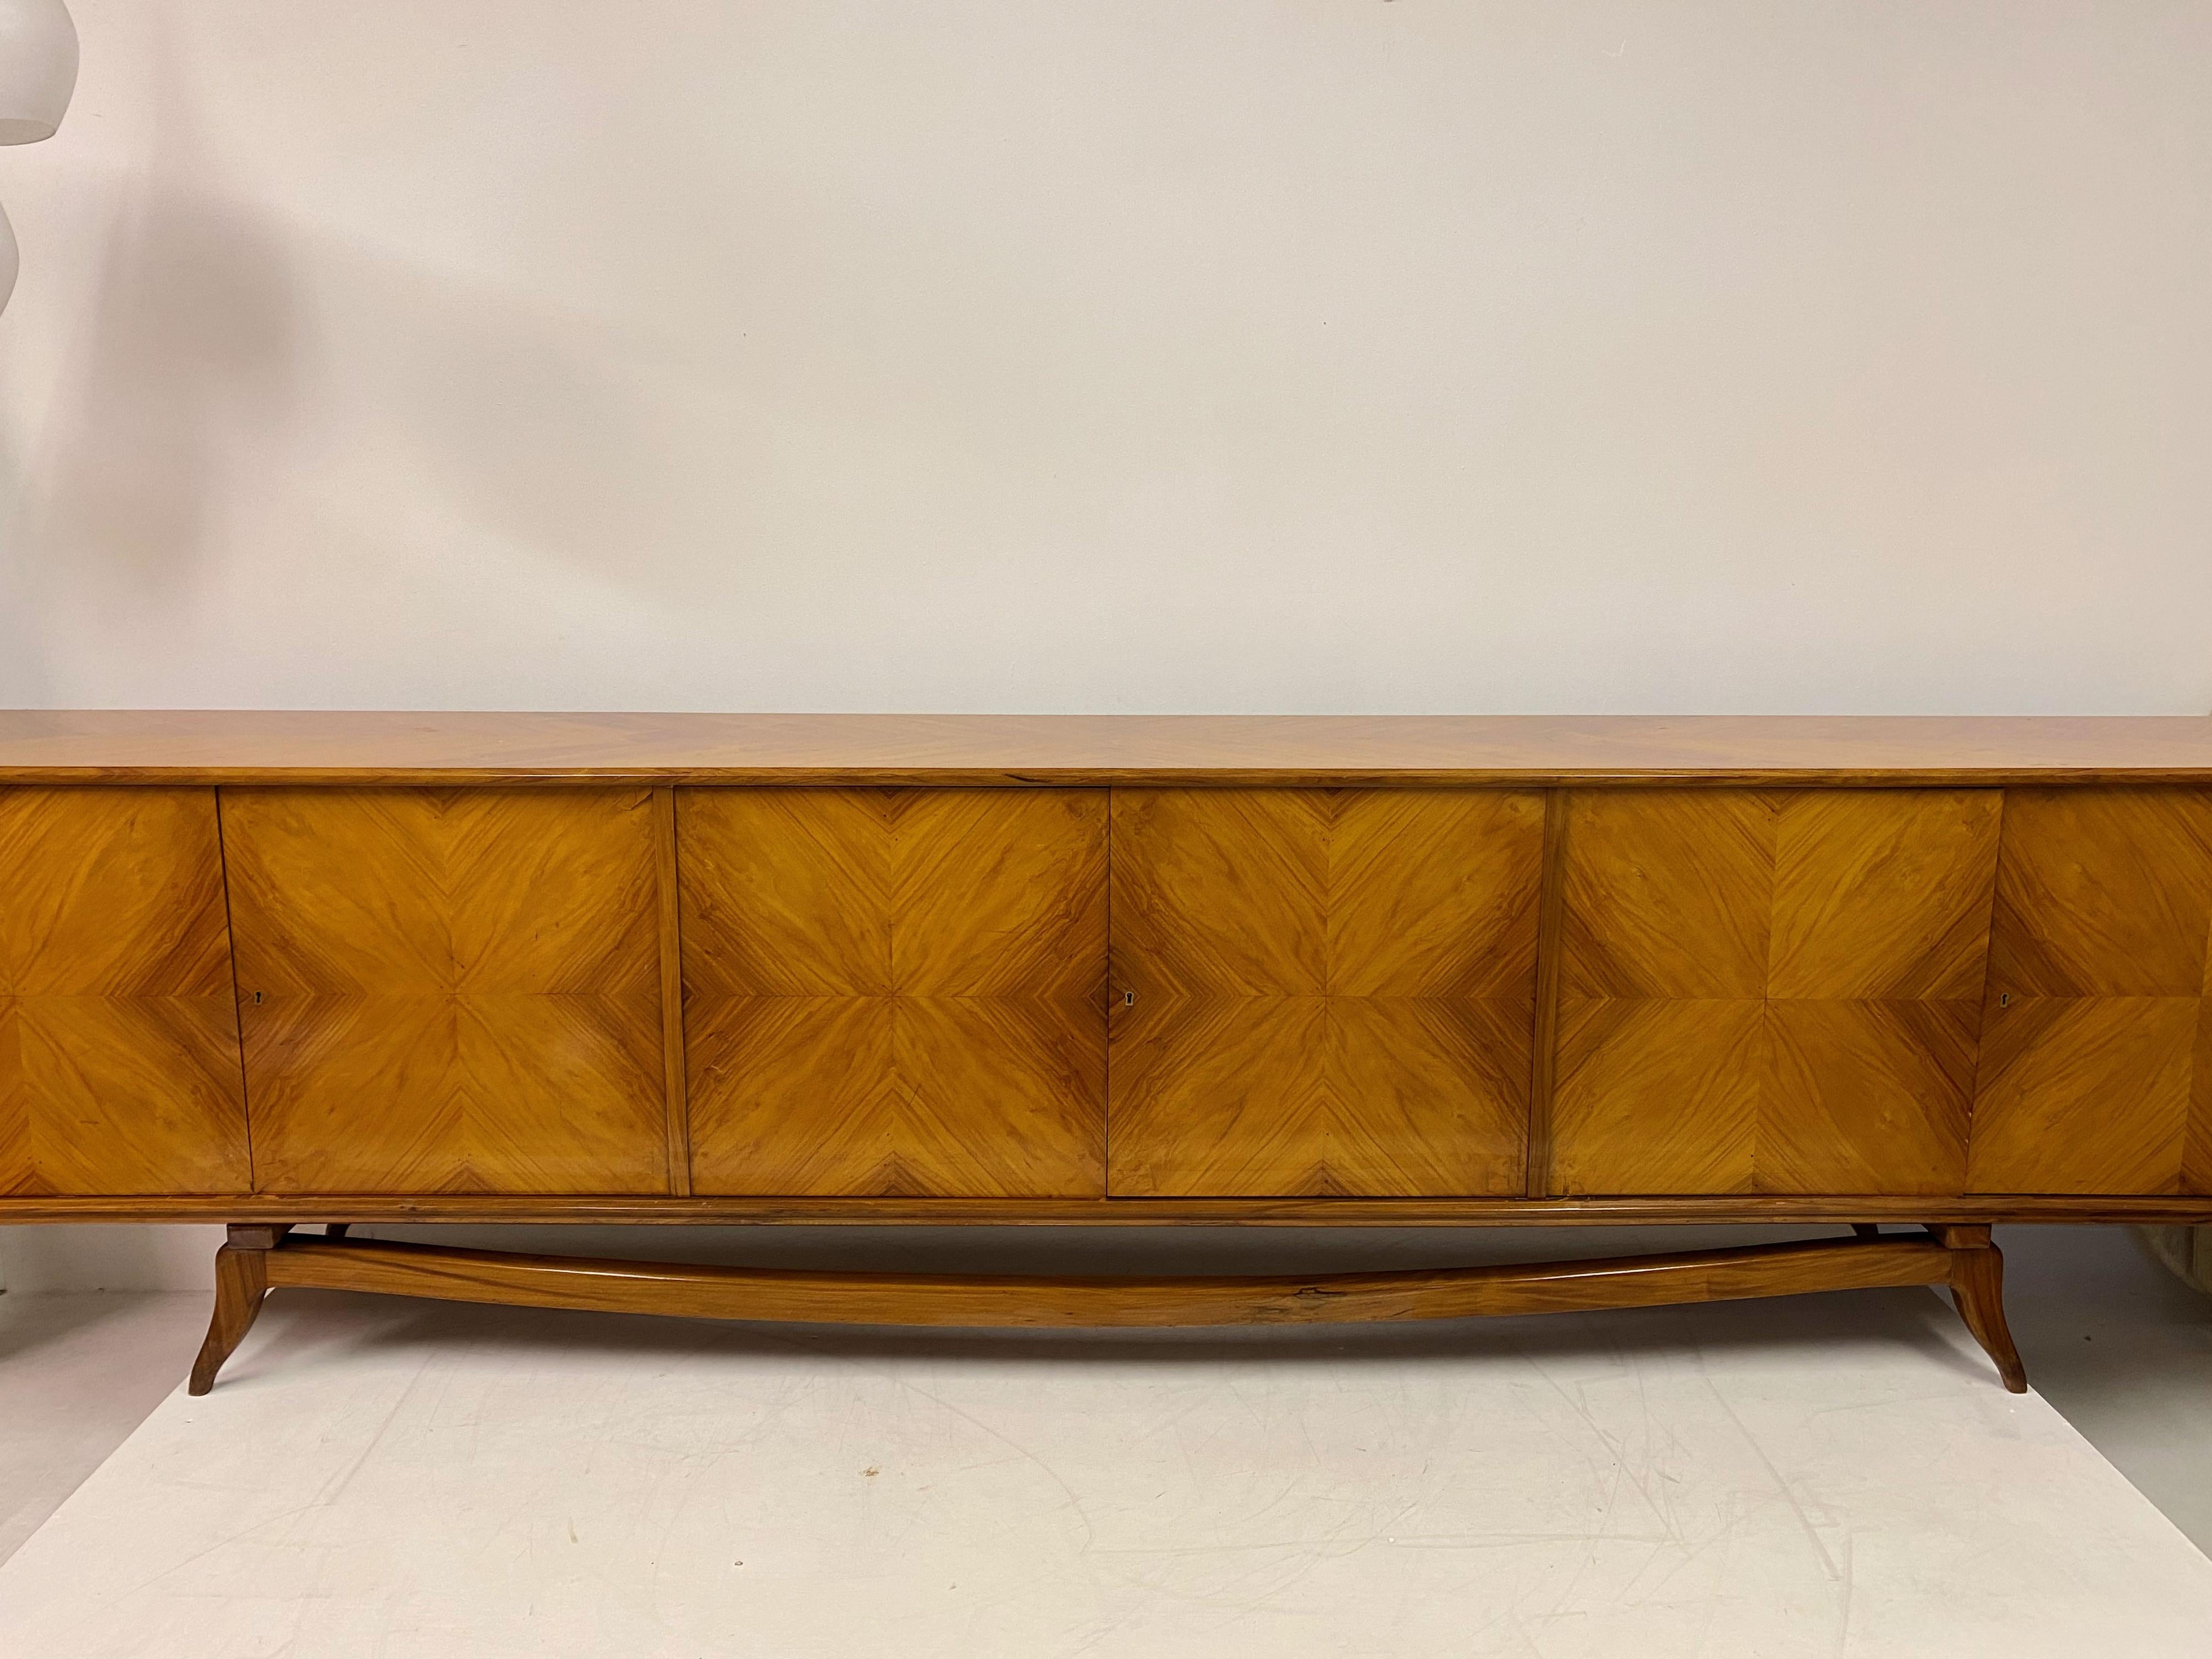 Incredible sideboard or credenza

Large size

Caviuna wood

Attributed to Giuseppe Scapinelli

Brazilian Mid Century.